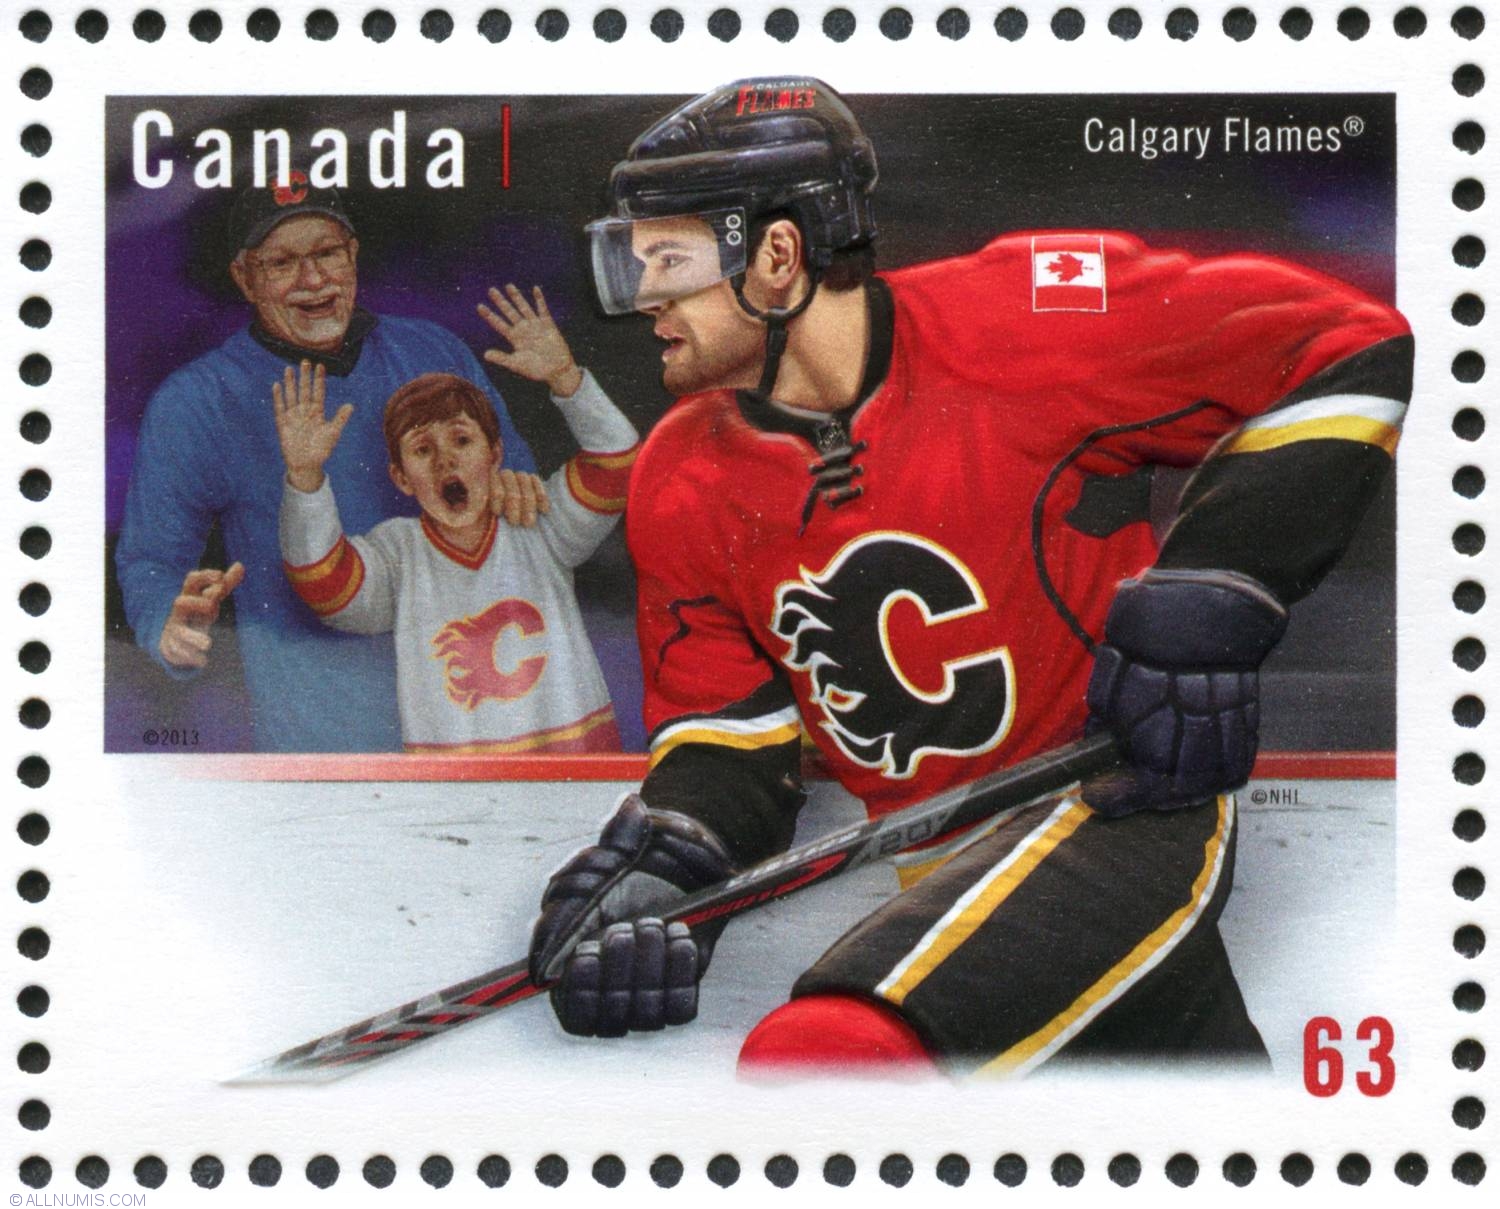 Vancouver Canucks - Canada Postage Stamp